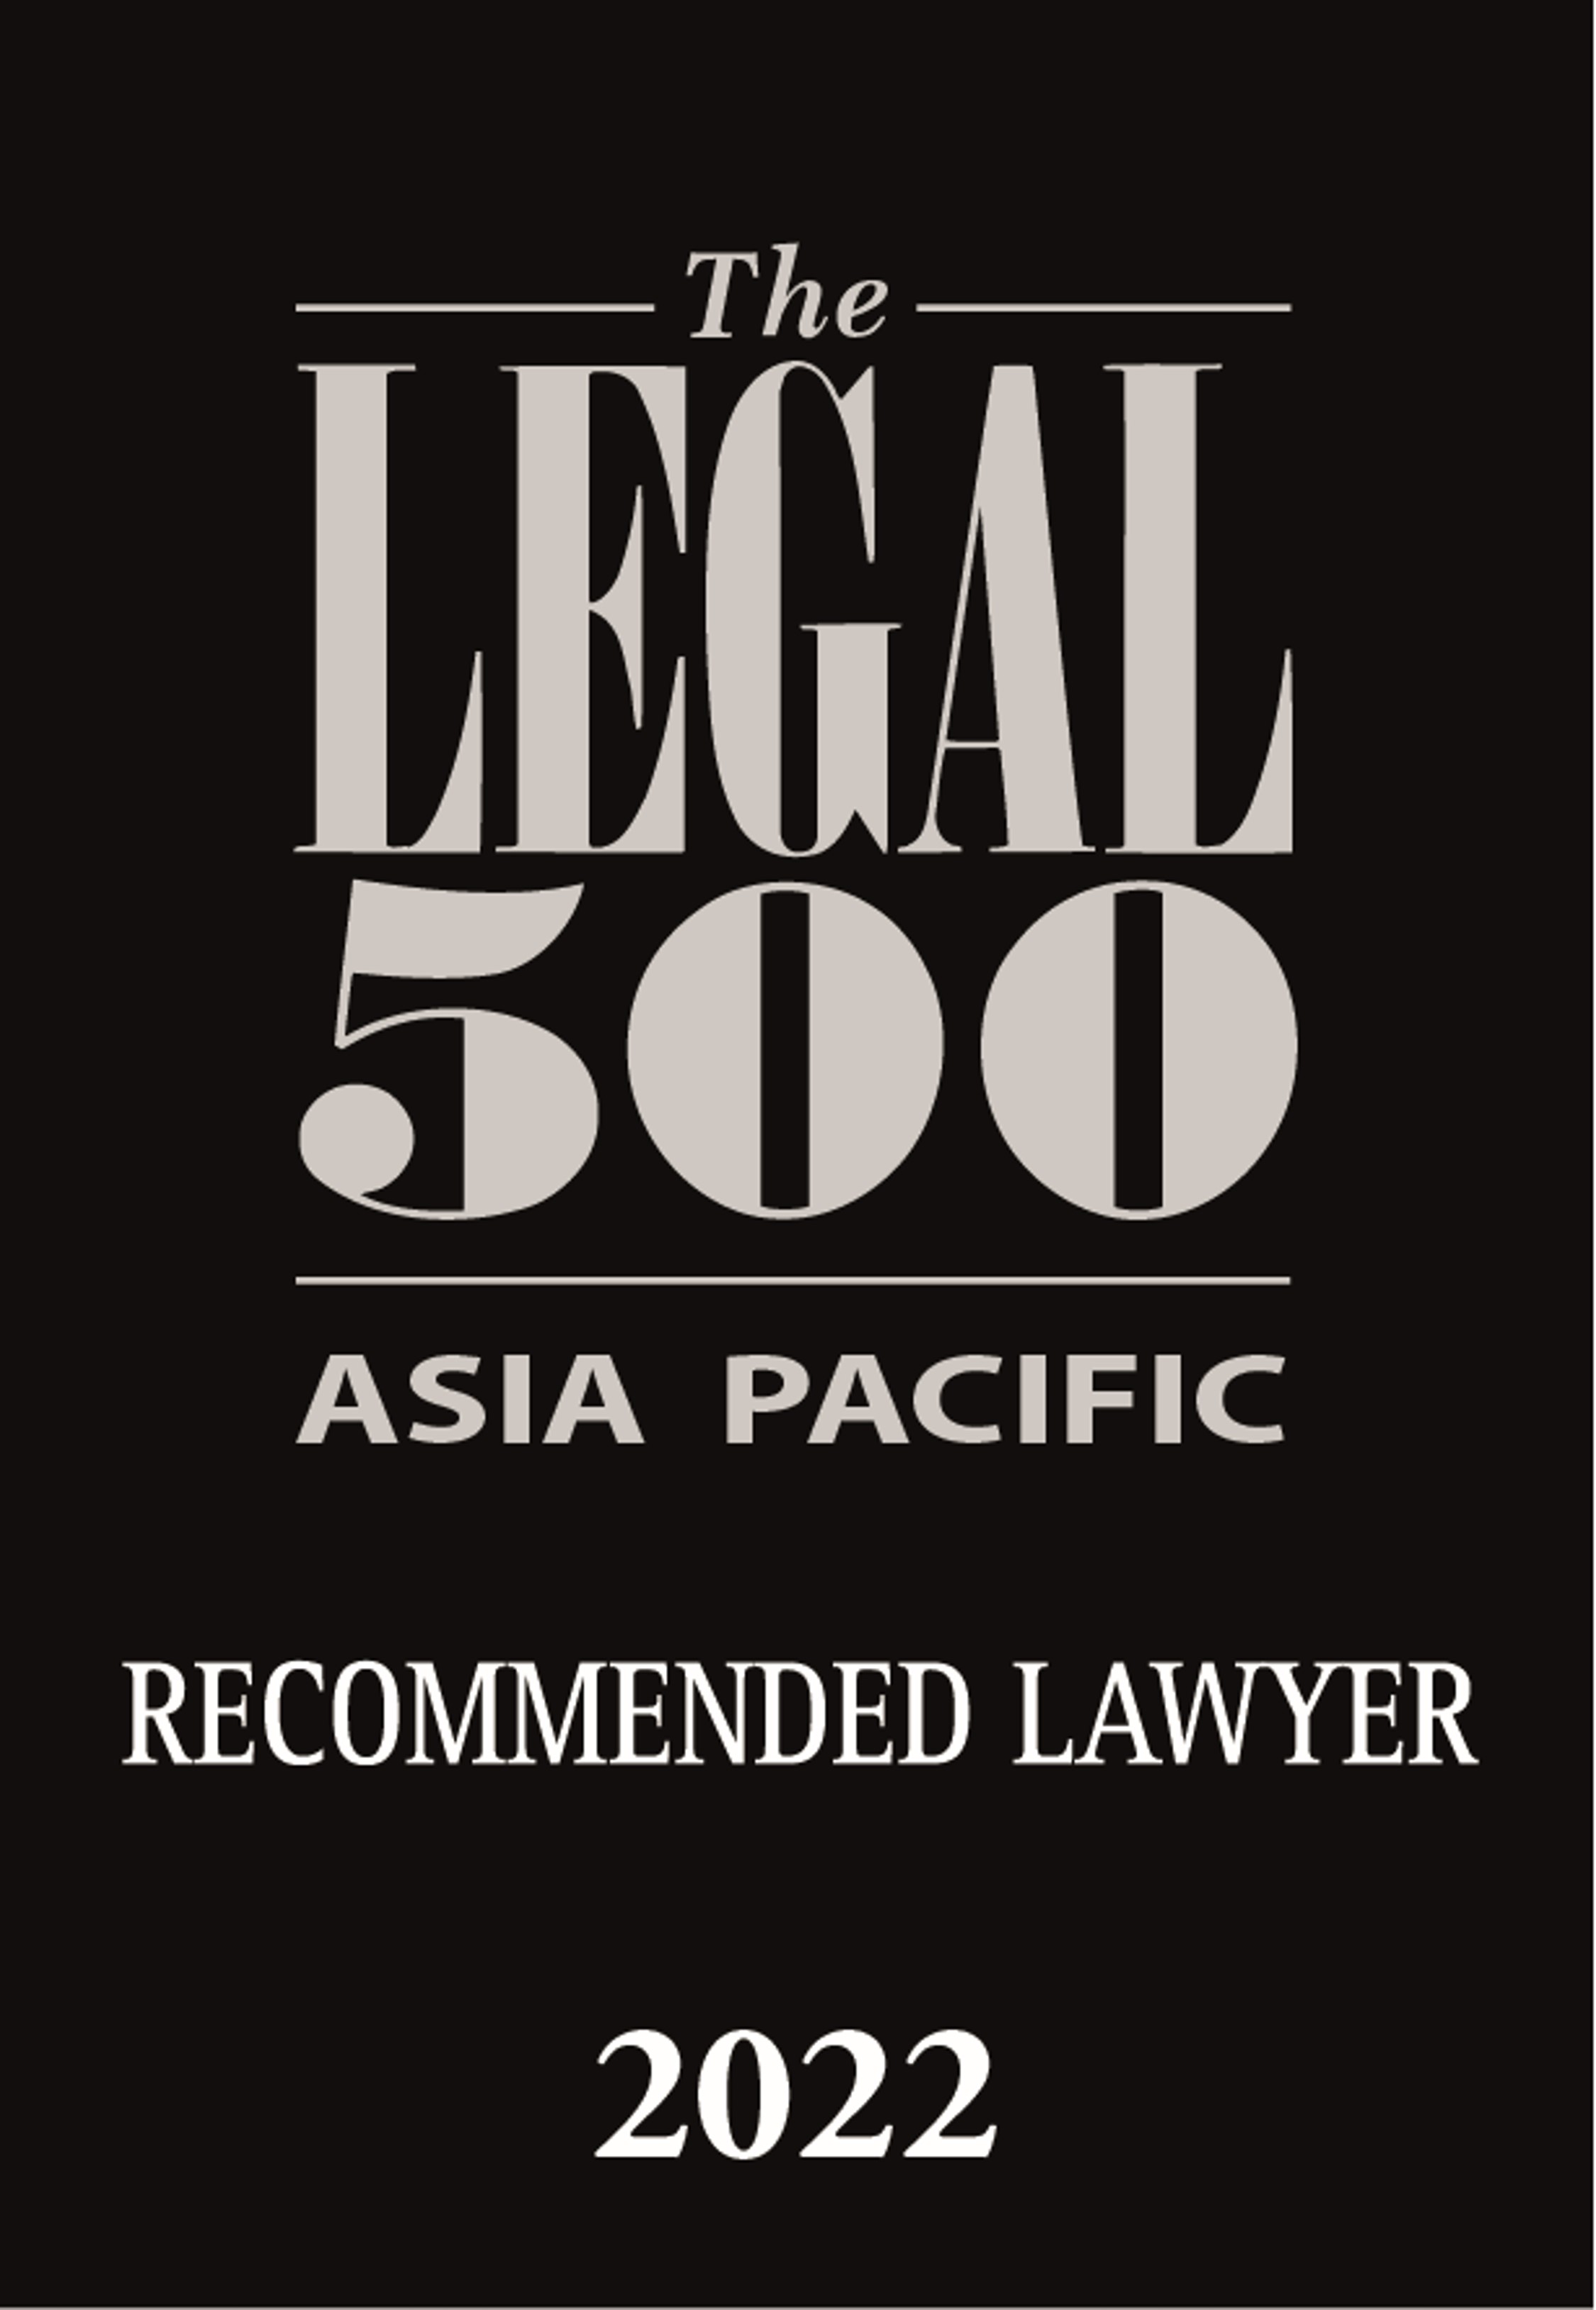 Recommended Lawyer in Corporate (including M&A) for Hong Kong by The Legal 500 Asia Pacific, 2022